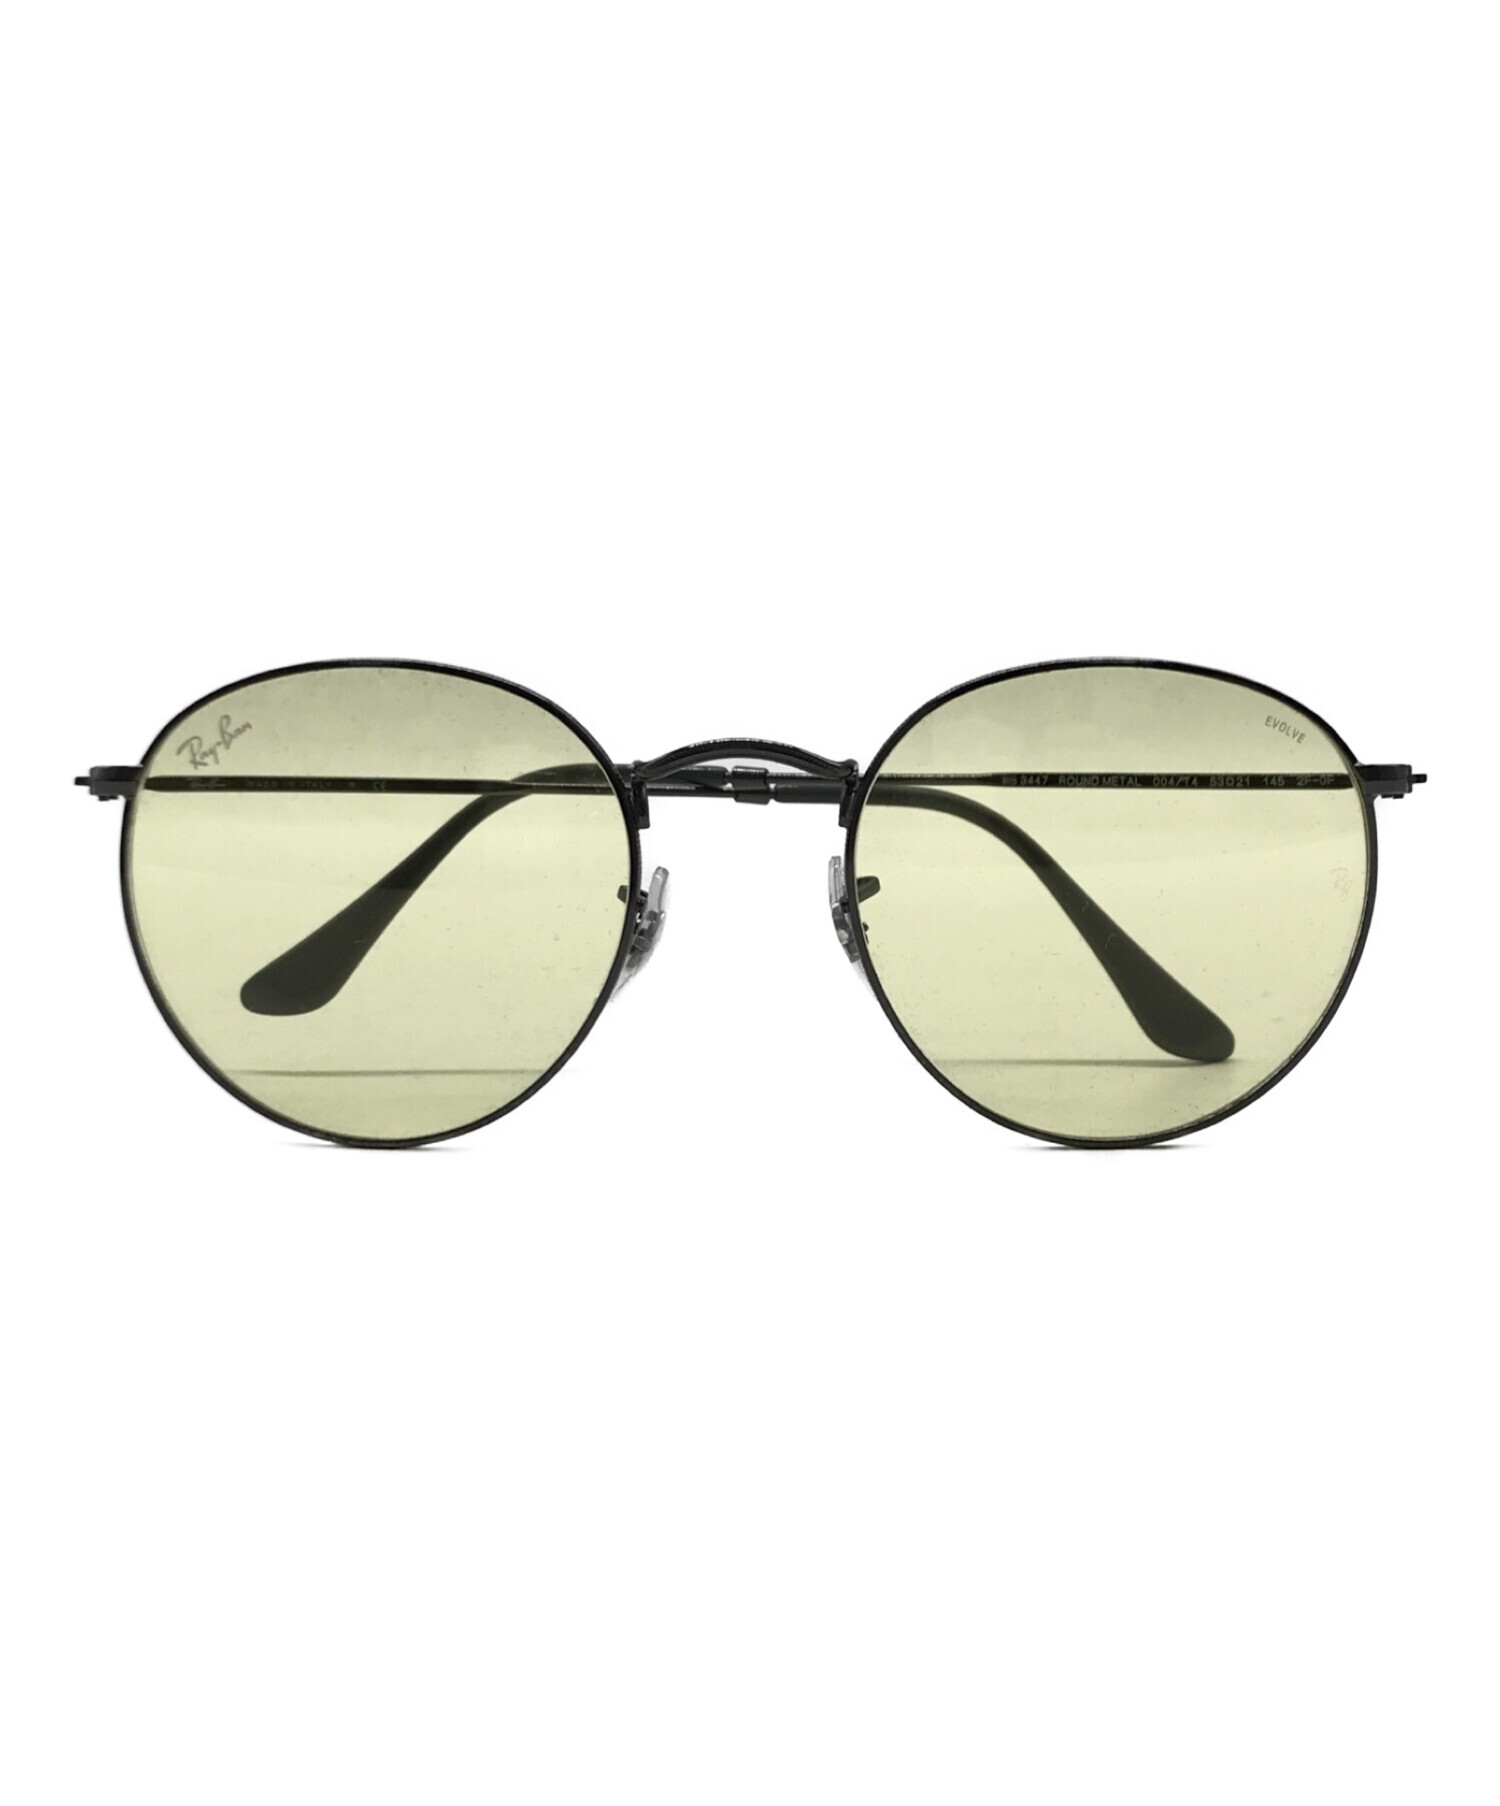 RAY-BAN (レイバン) ROUND METAL　RB3447 グレー×イエロー